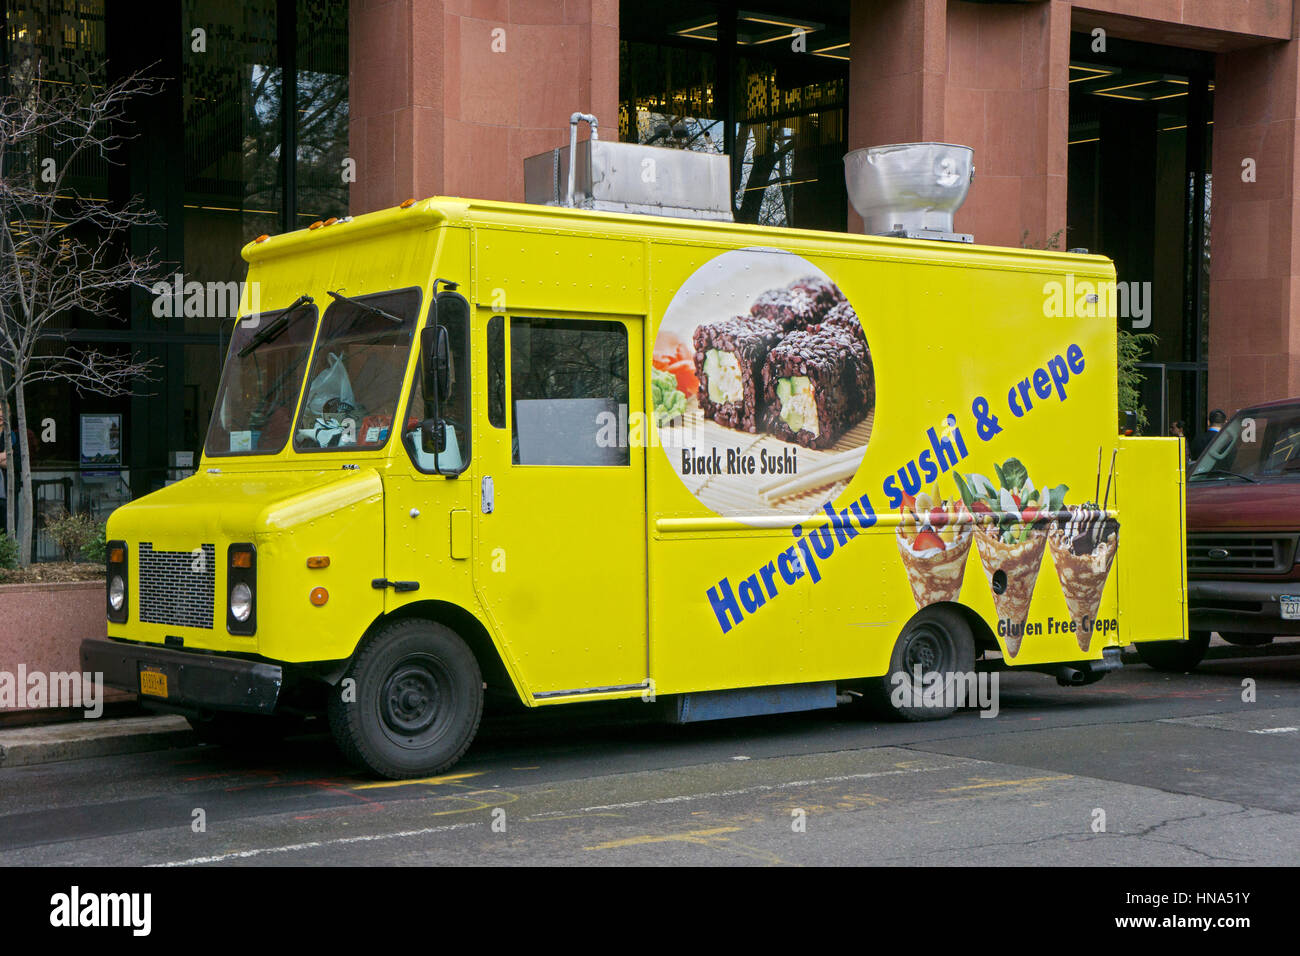 A food van selling sushi and crepes parked near NYU in Greenwich Village, Manhattan, New York City Stock Photo